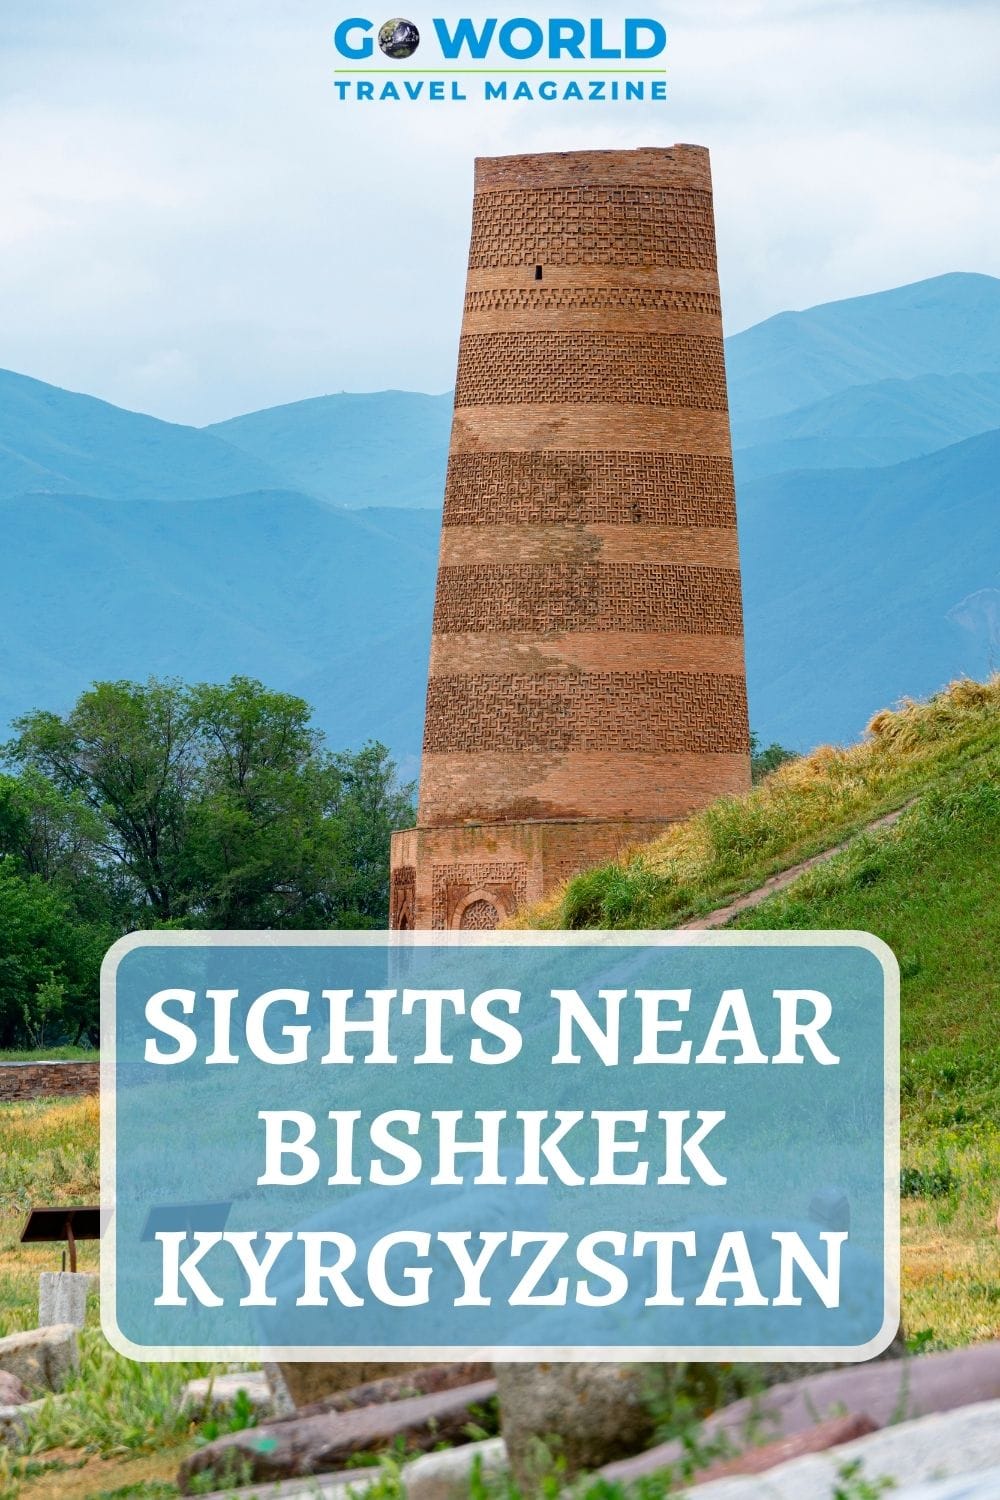 Bishkek is the capital of Kyrgyzstan and is a perfect base to explore the natural beauty and historic sights in the heartlands of central Asia. #Kyrgyzstan #bishkek